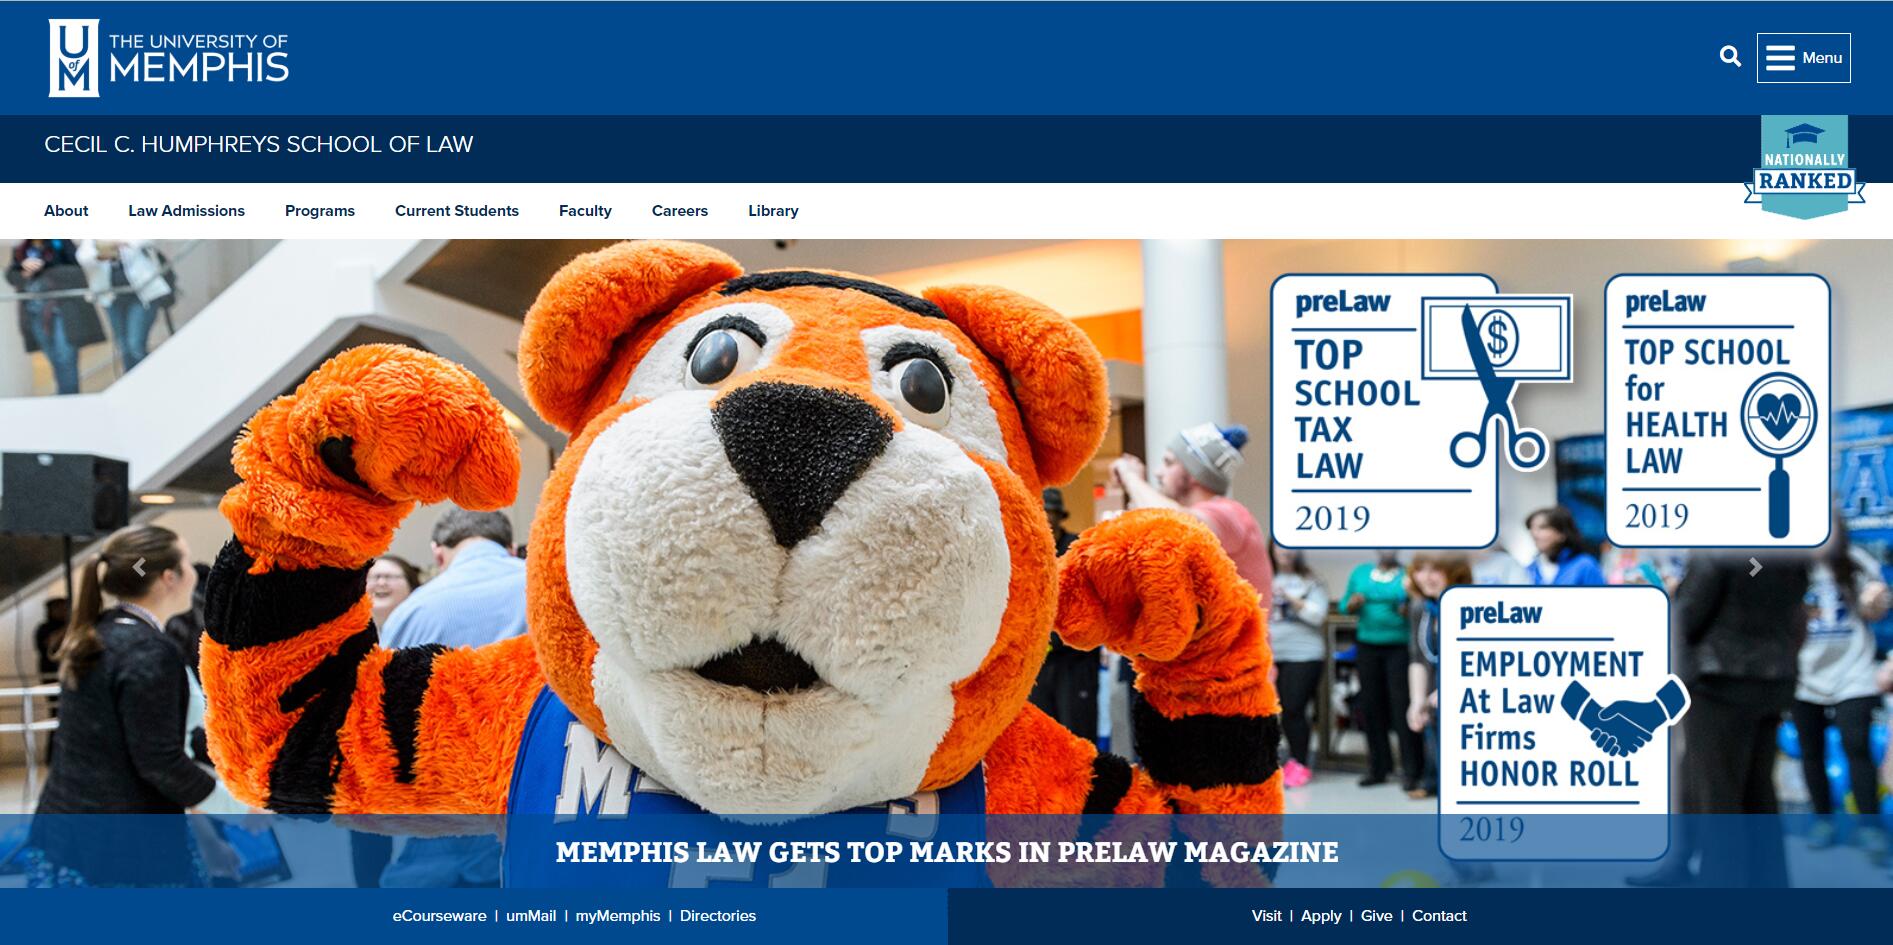 The Cecil C. Humphreys School of Law at University of Memphis